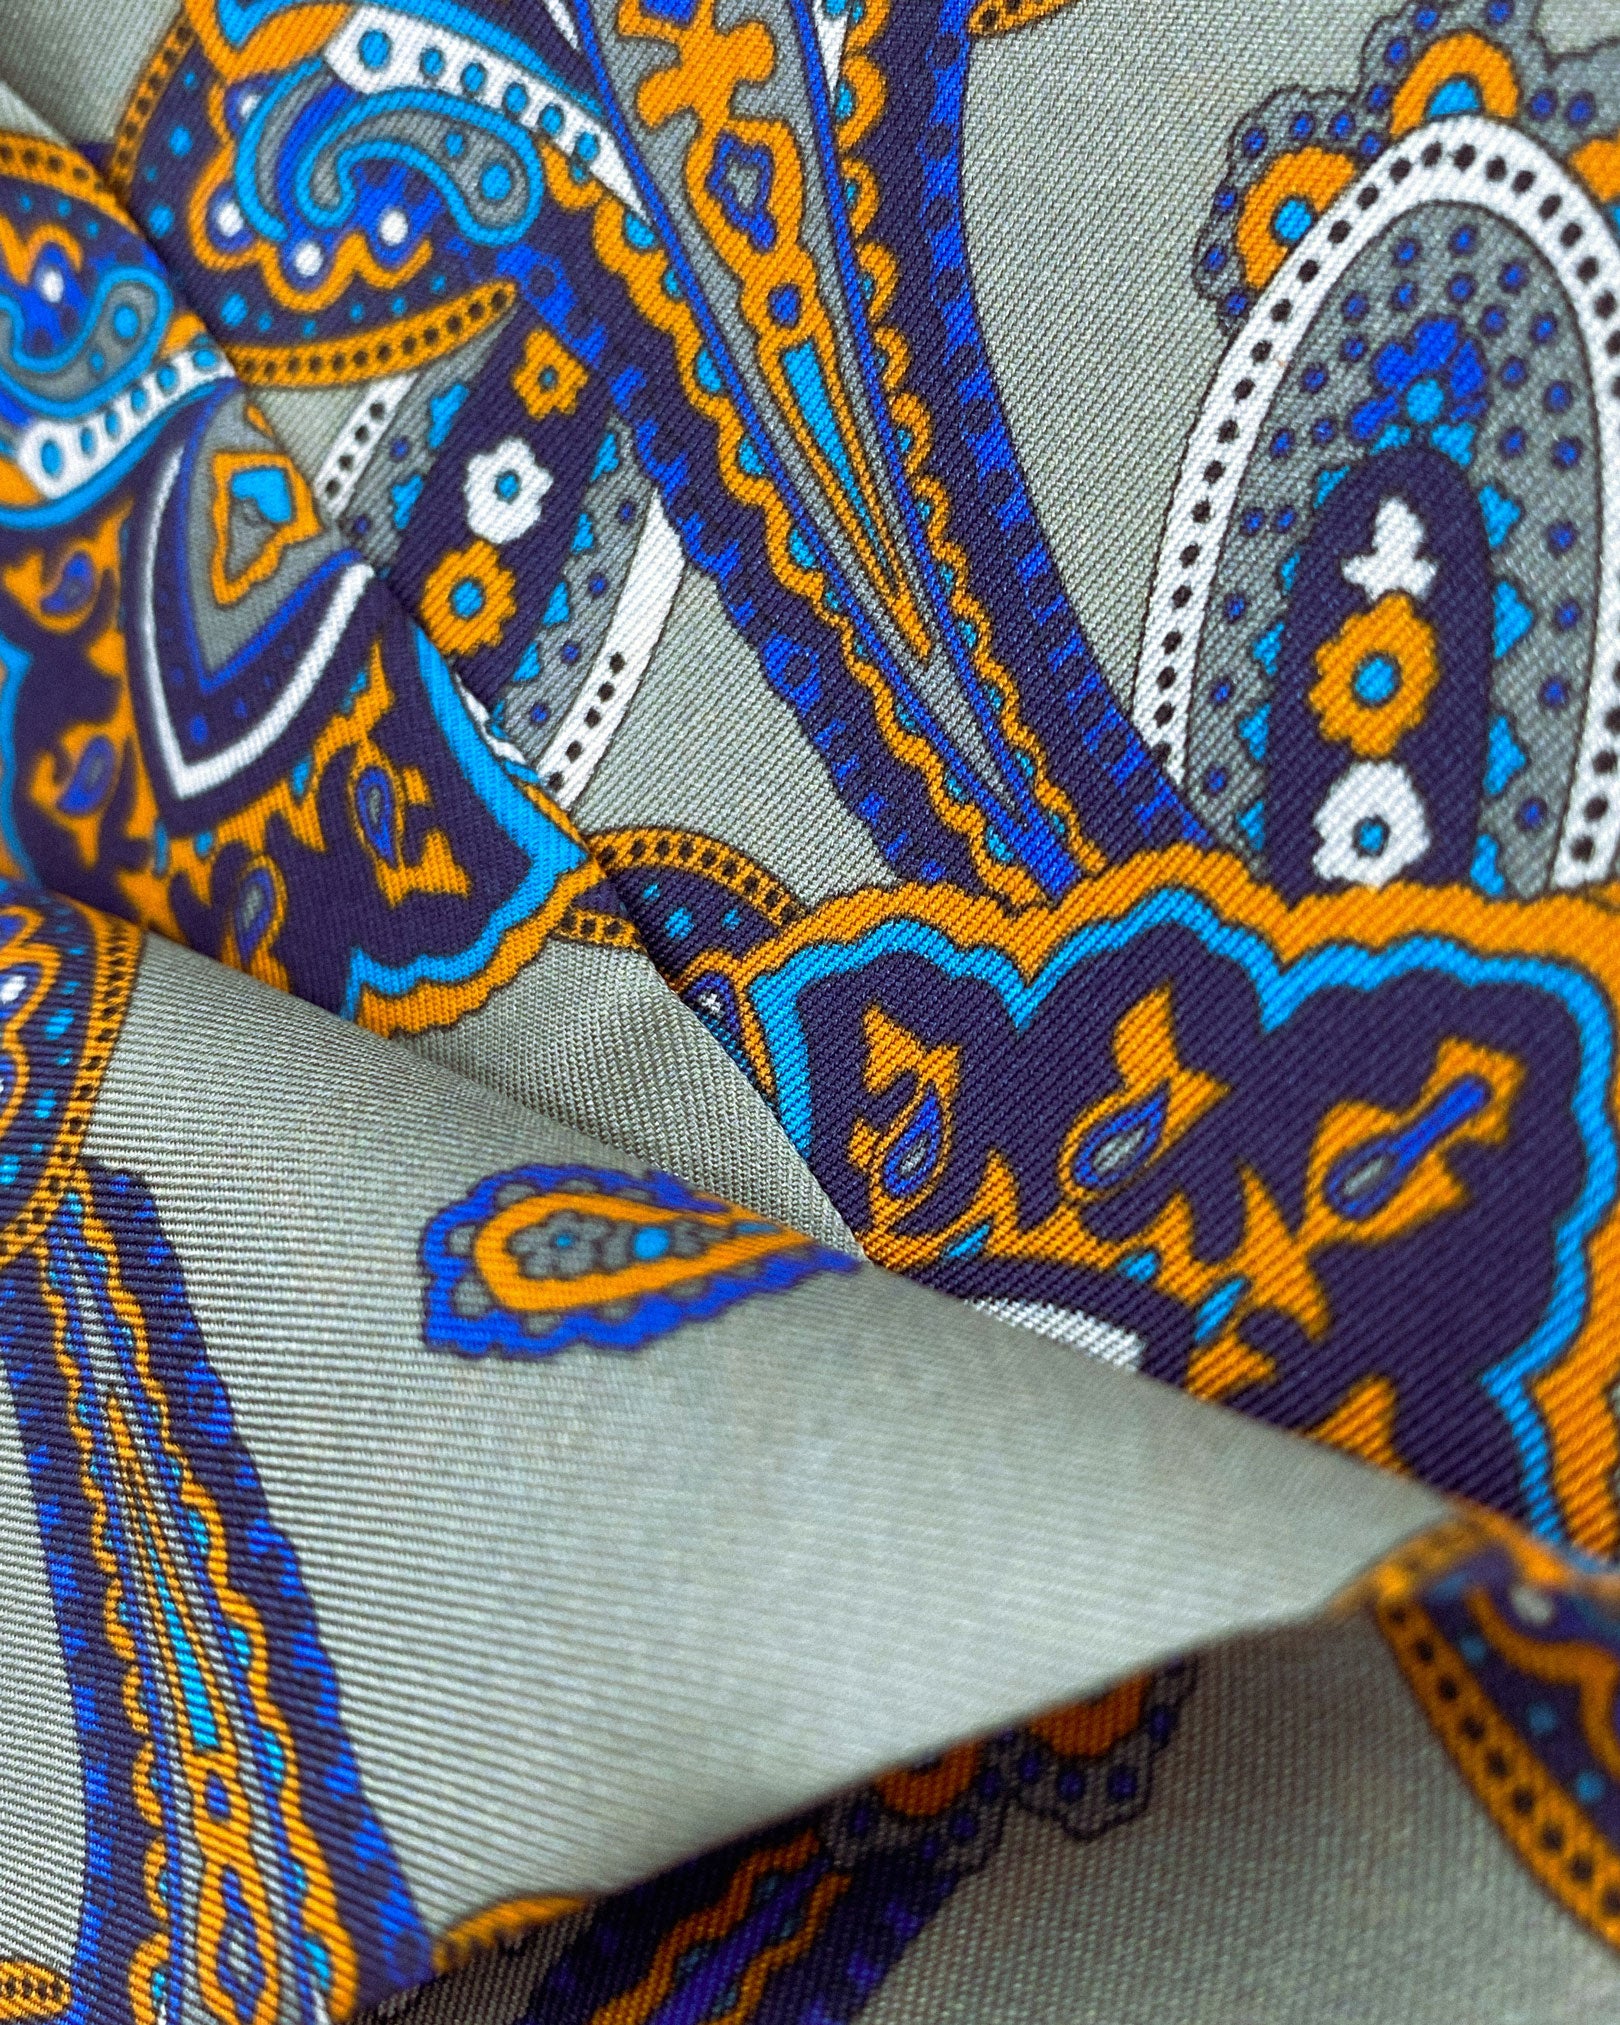 Ruffled close-up view of the Tremblant polyester scarf, presenting a closer view of the  orange and light blue paisley forms on a grey-cream ground.